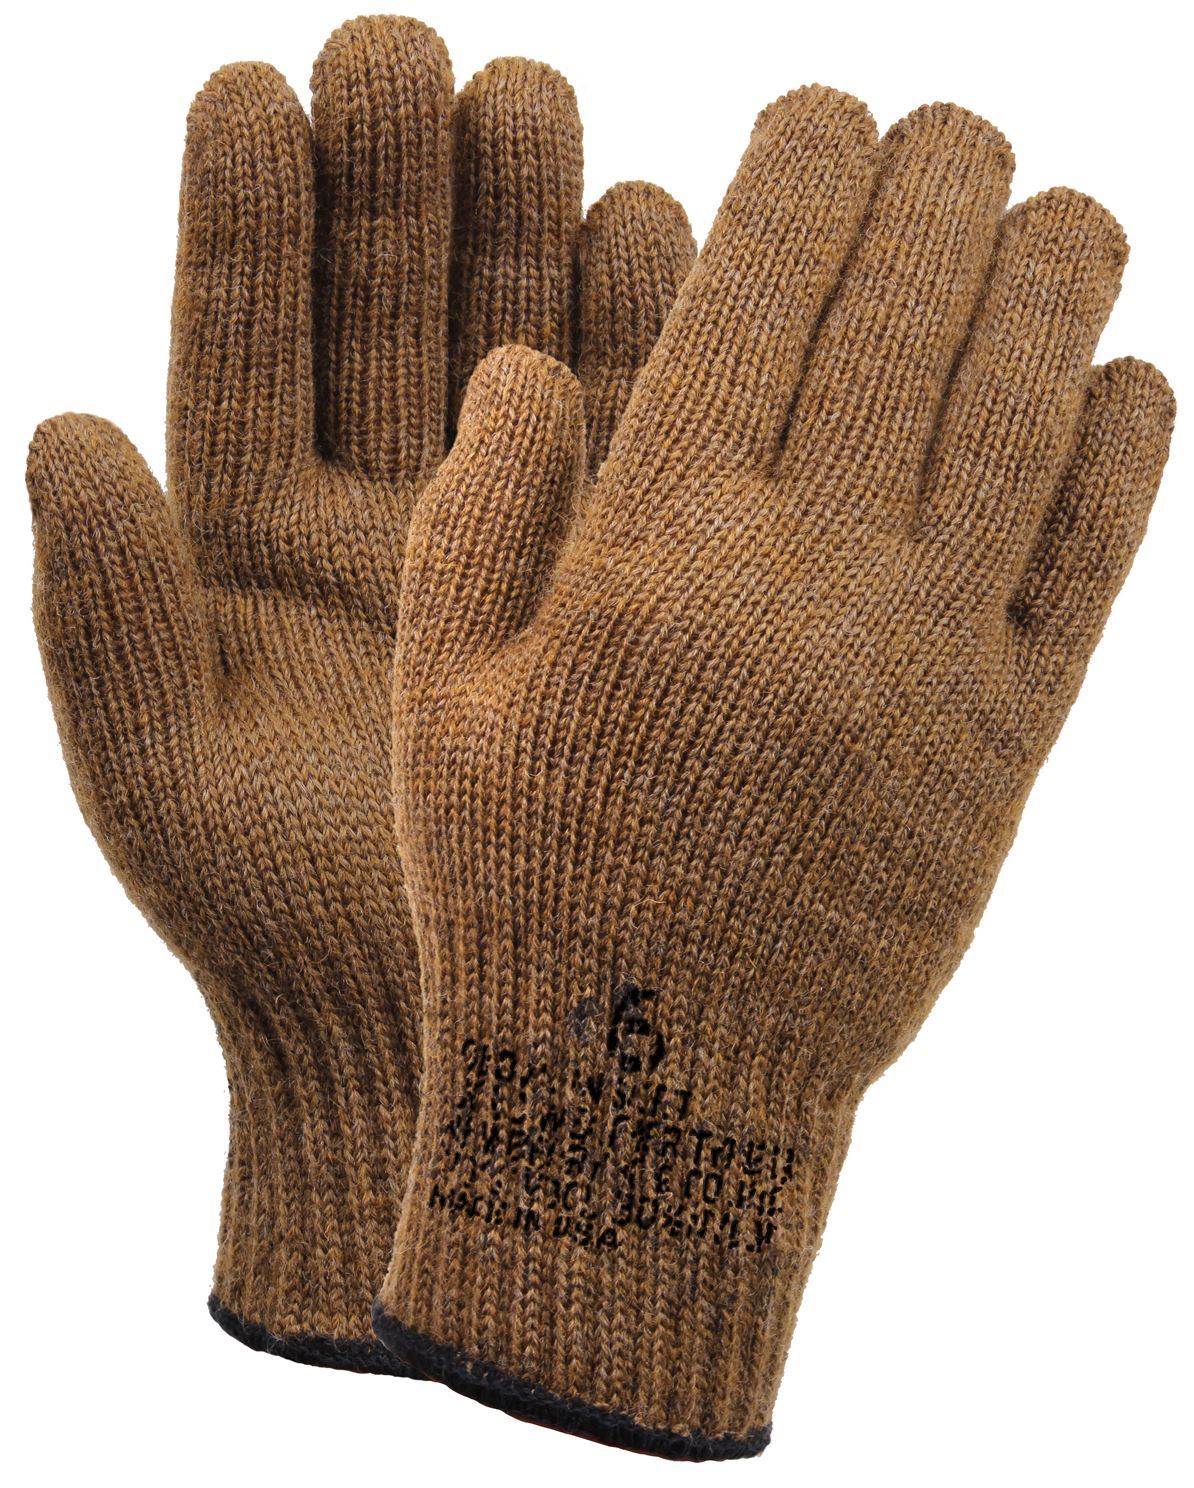 Tactical G.I. Glove Liners Color : Coyote Brown, Size : 3 (5 per pack)